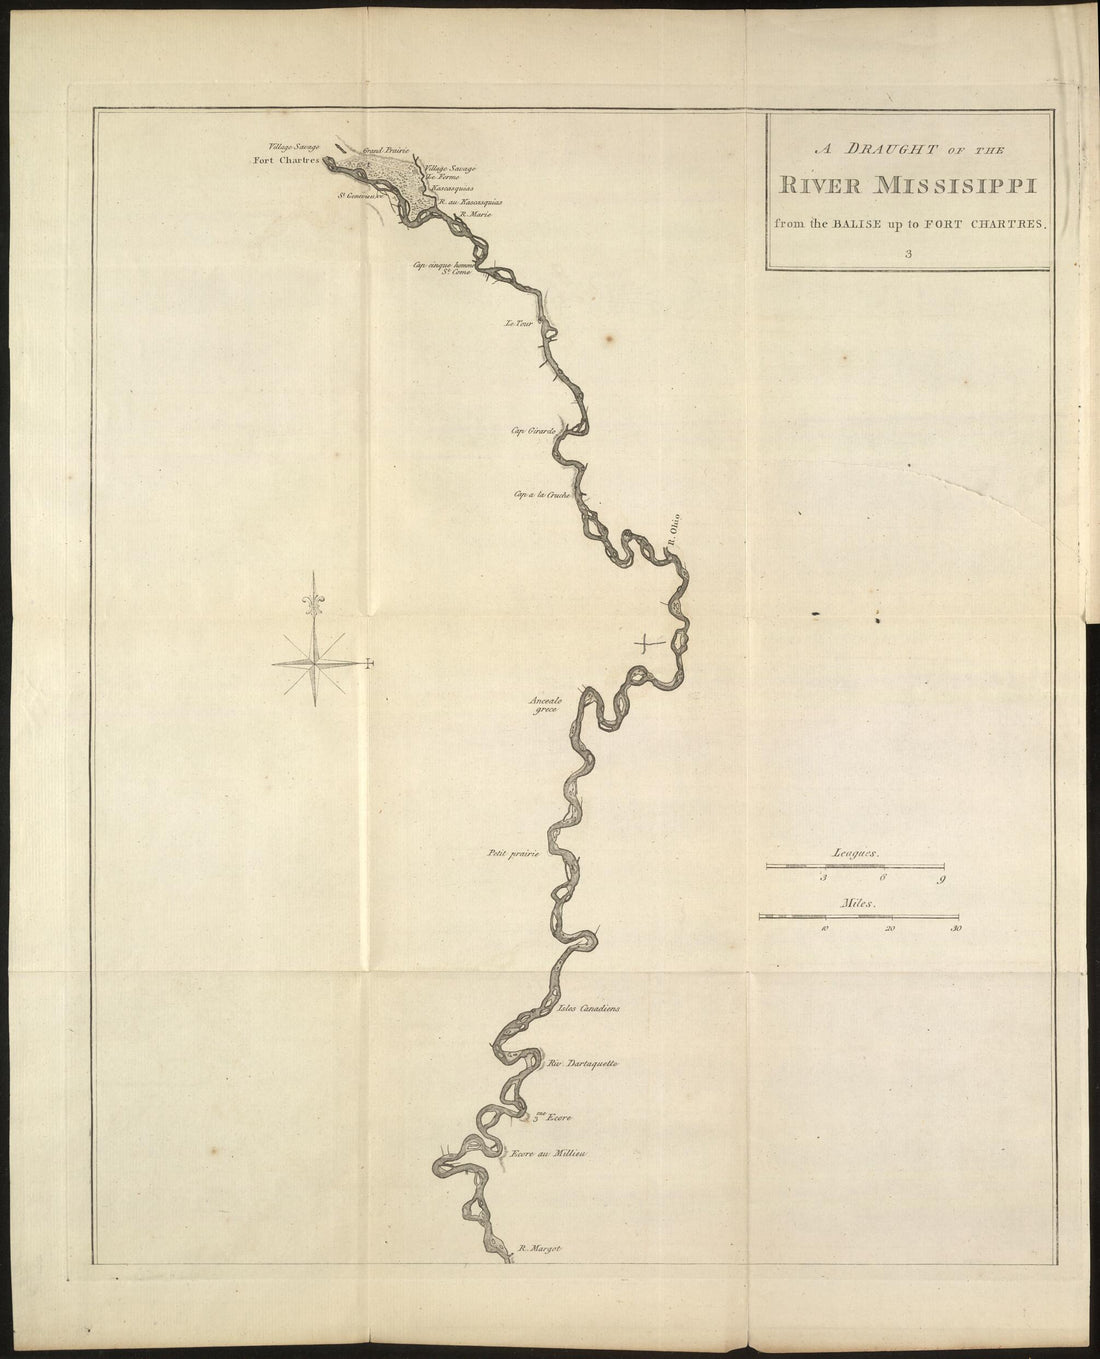 This old map of A Draught of the Missisippi sic River from Balise Up to Fort Chartres. (Draught of the Mississippi River from Balise Up to Fort Chartres) from 1770 was created by Philip Pittman in 1770